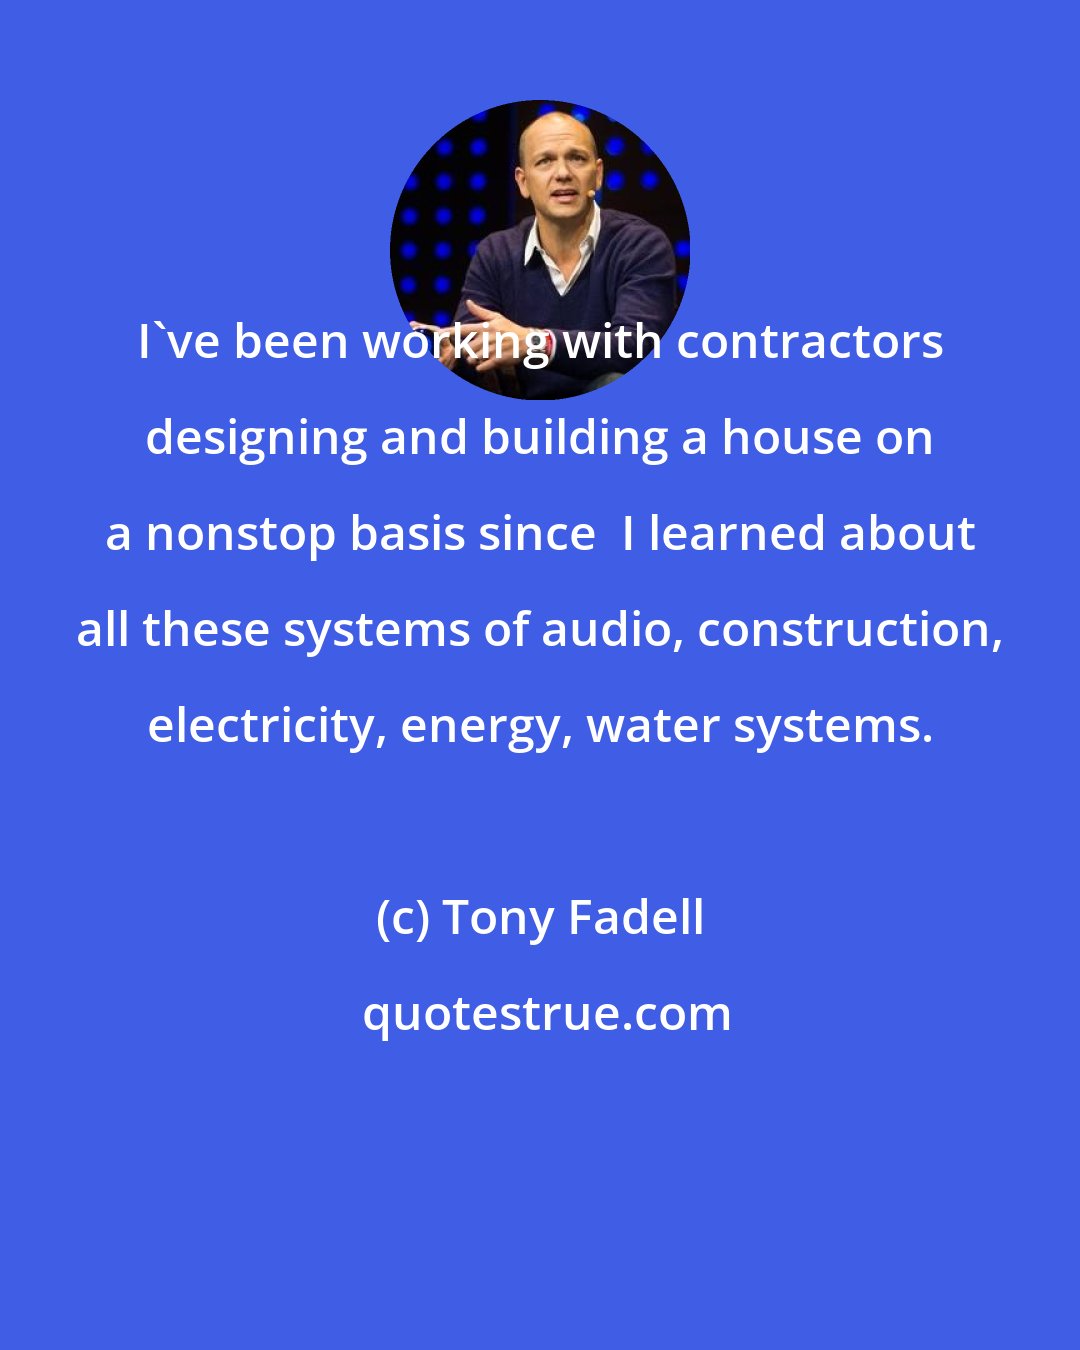 Tony Fadell: I've been working with contractors designing and building a house on a nonstop basis since  I learned about all these systems of audio, construction, electricity, energy, water systems.